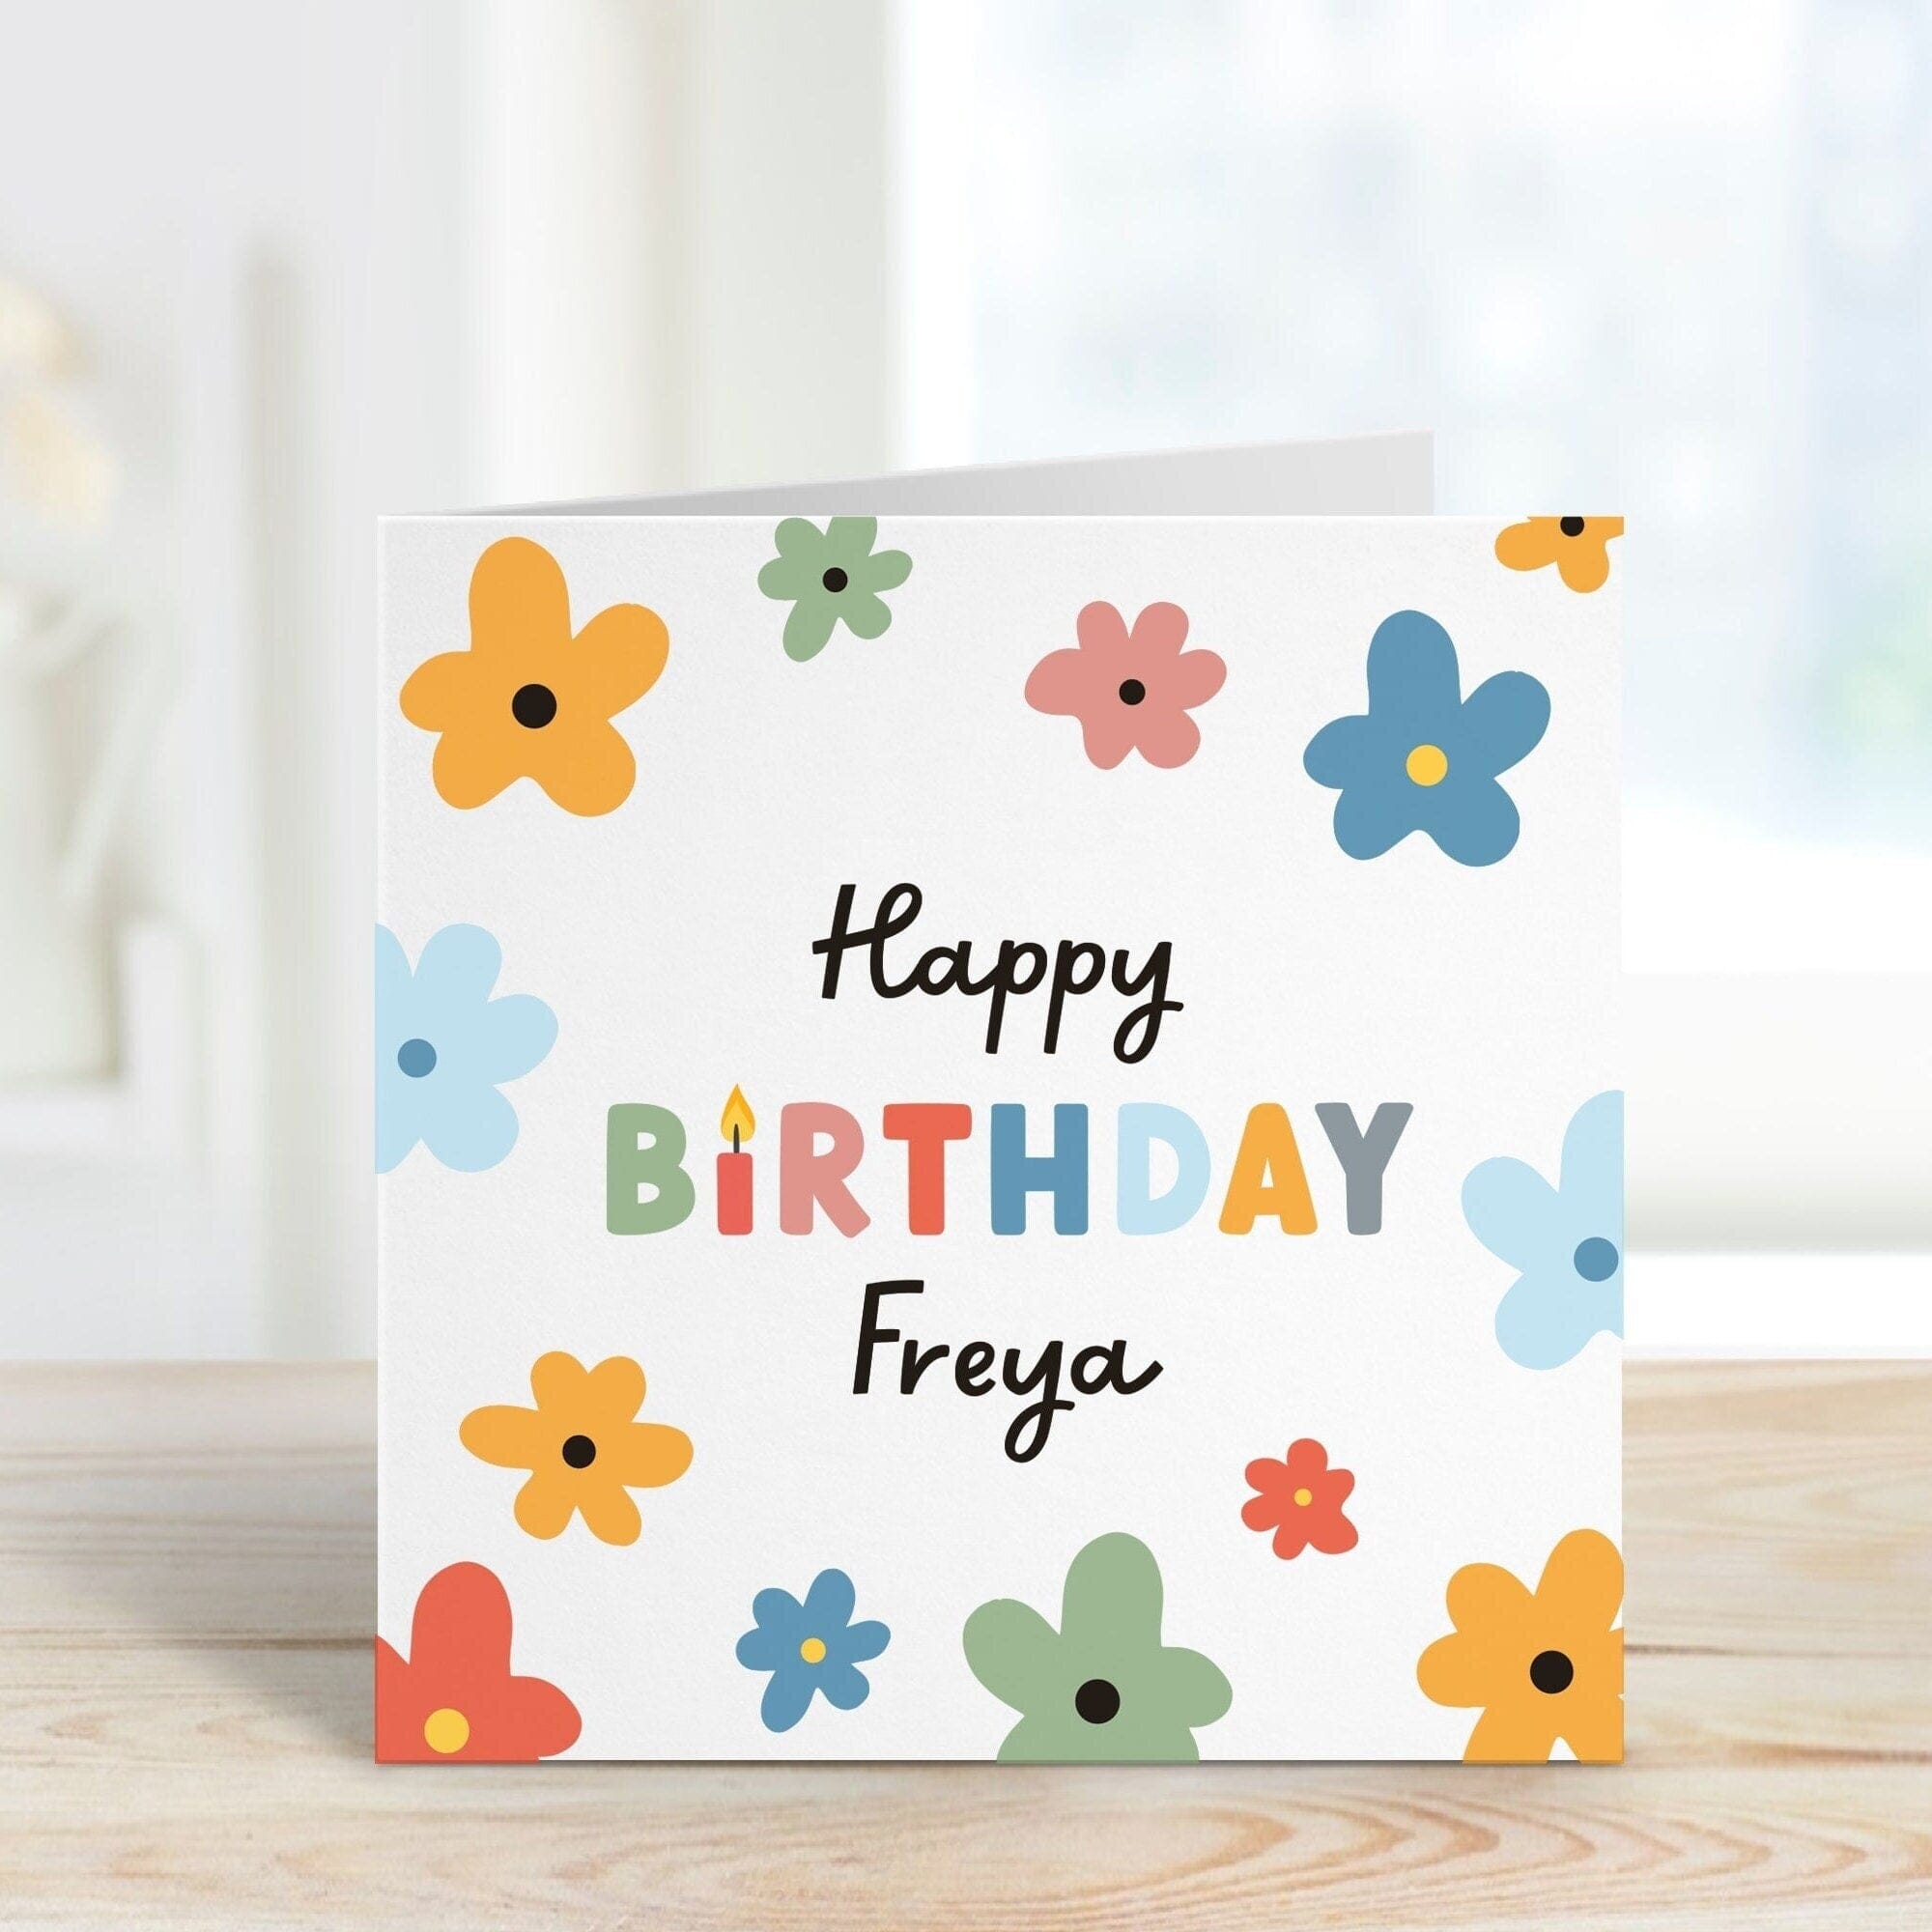 Personalised Colourful Flower Birthday Card with Envelope, Floral design w name, Greetings Card for her him